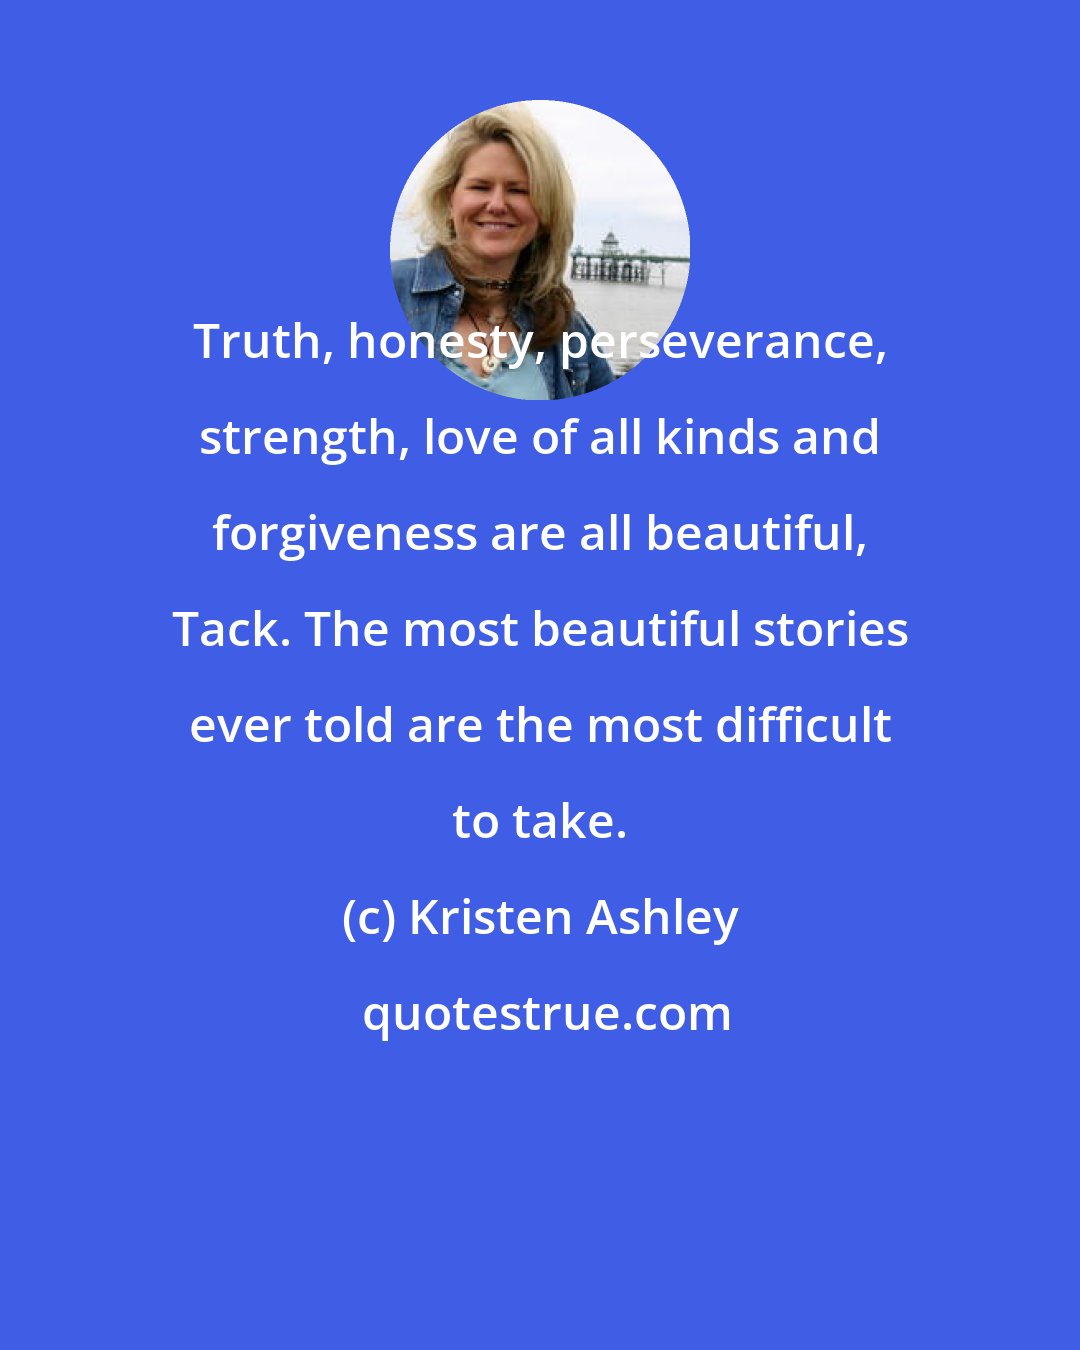 Kristen Ashley: Truth, honesty, perseverance, strength, love of all kinds and forgiveness are all beautiful, Tack. The most beautiful stories ever told are the most difficult to take.